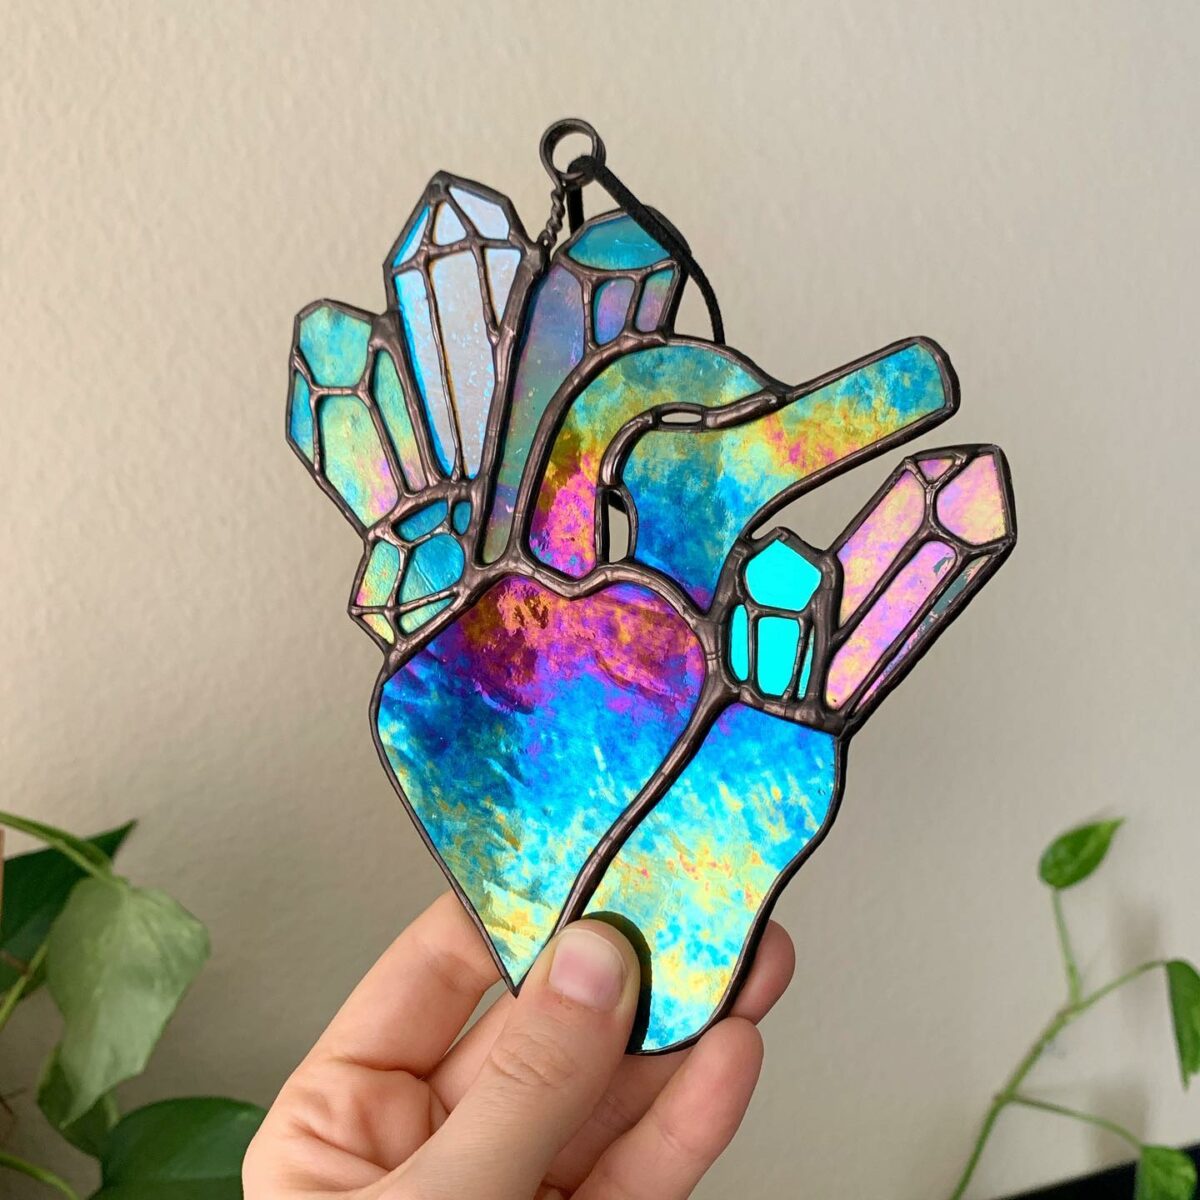 The Colorful Nature Inspired Stained Glass Art Of Meggy Wilm (10)